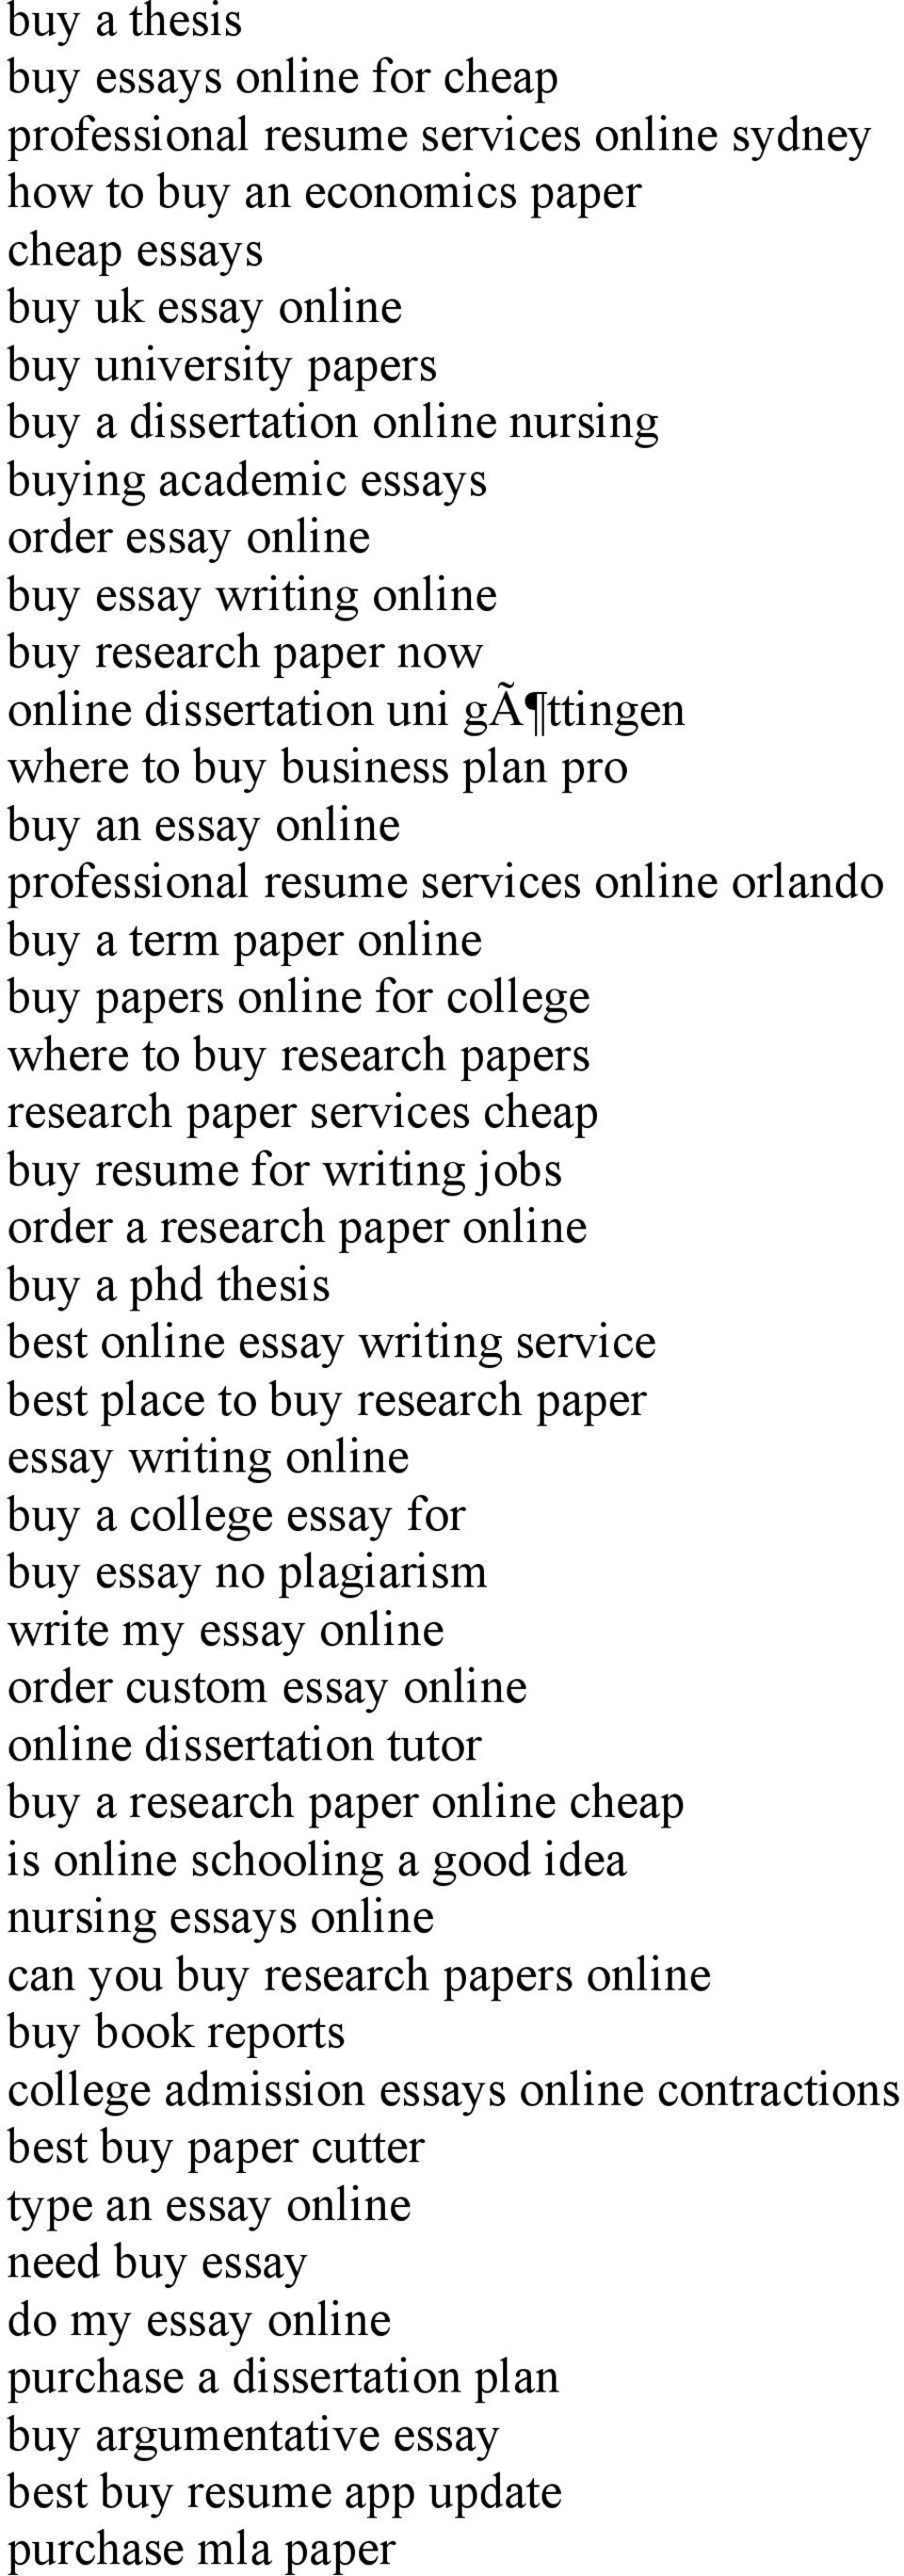 resume services online orlando buy a term paper online buy papers online for college where to buy research papers research paper services cheap buy resume for writing jobs order a research paper